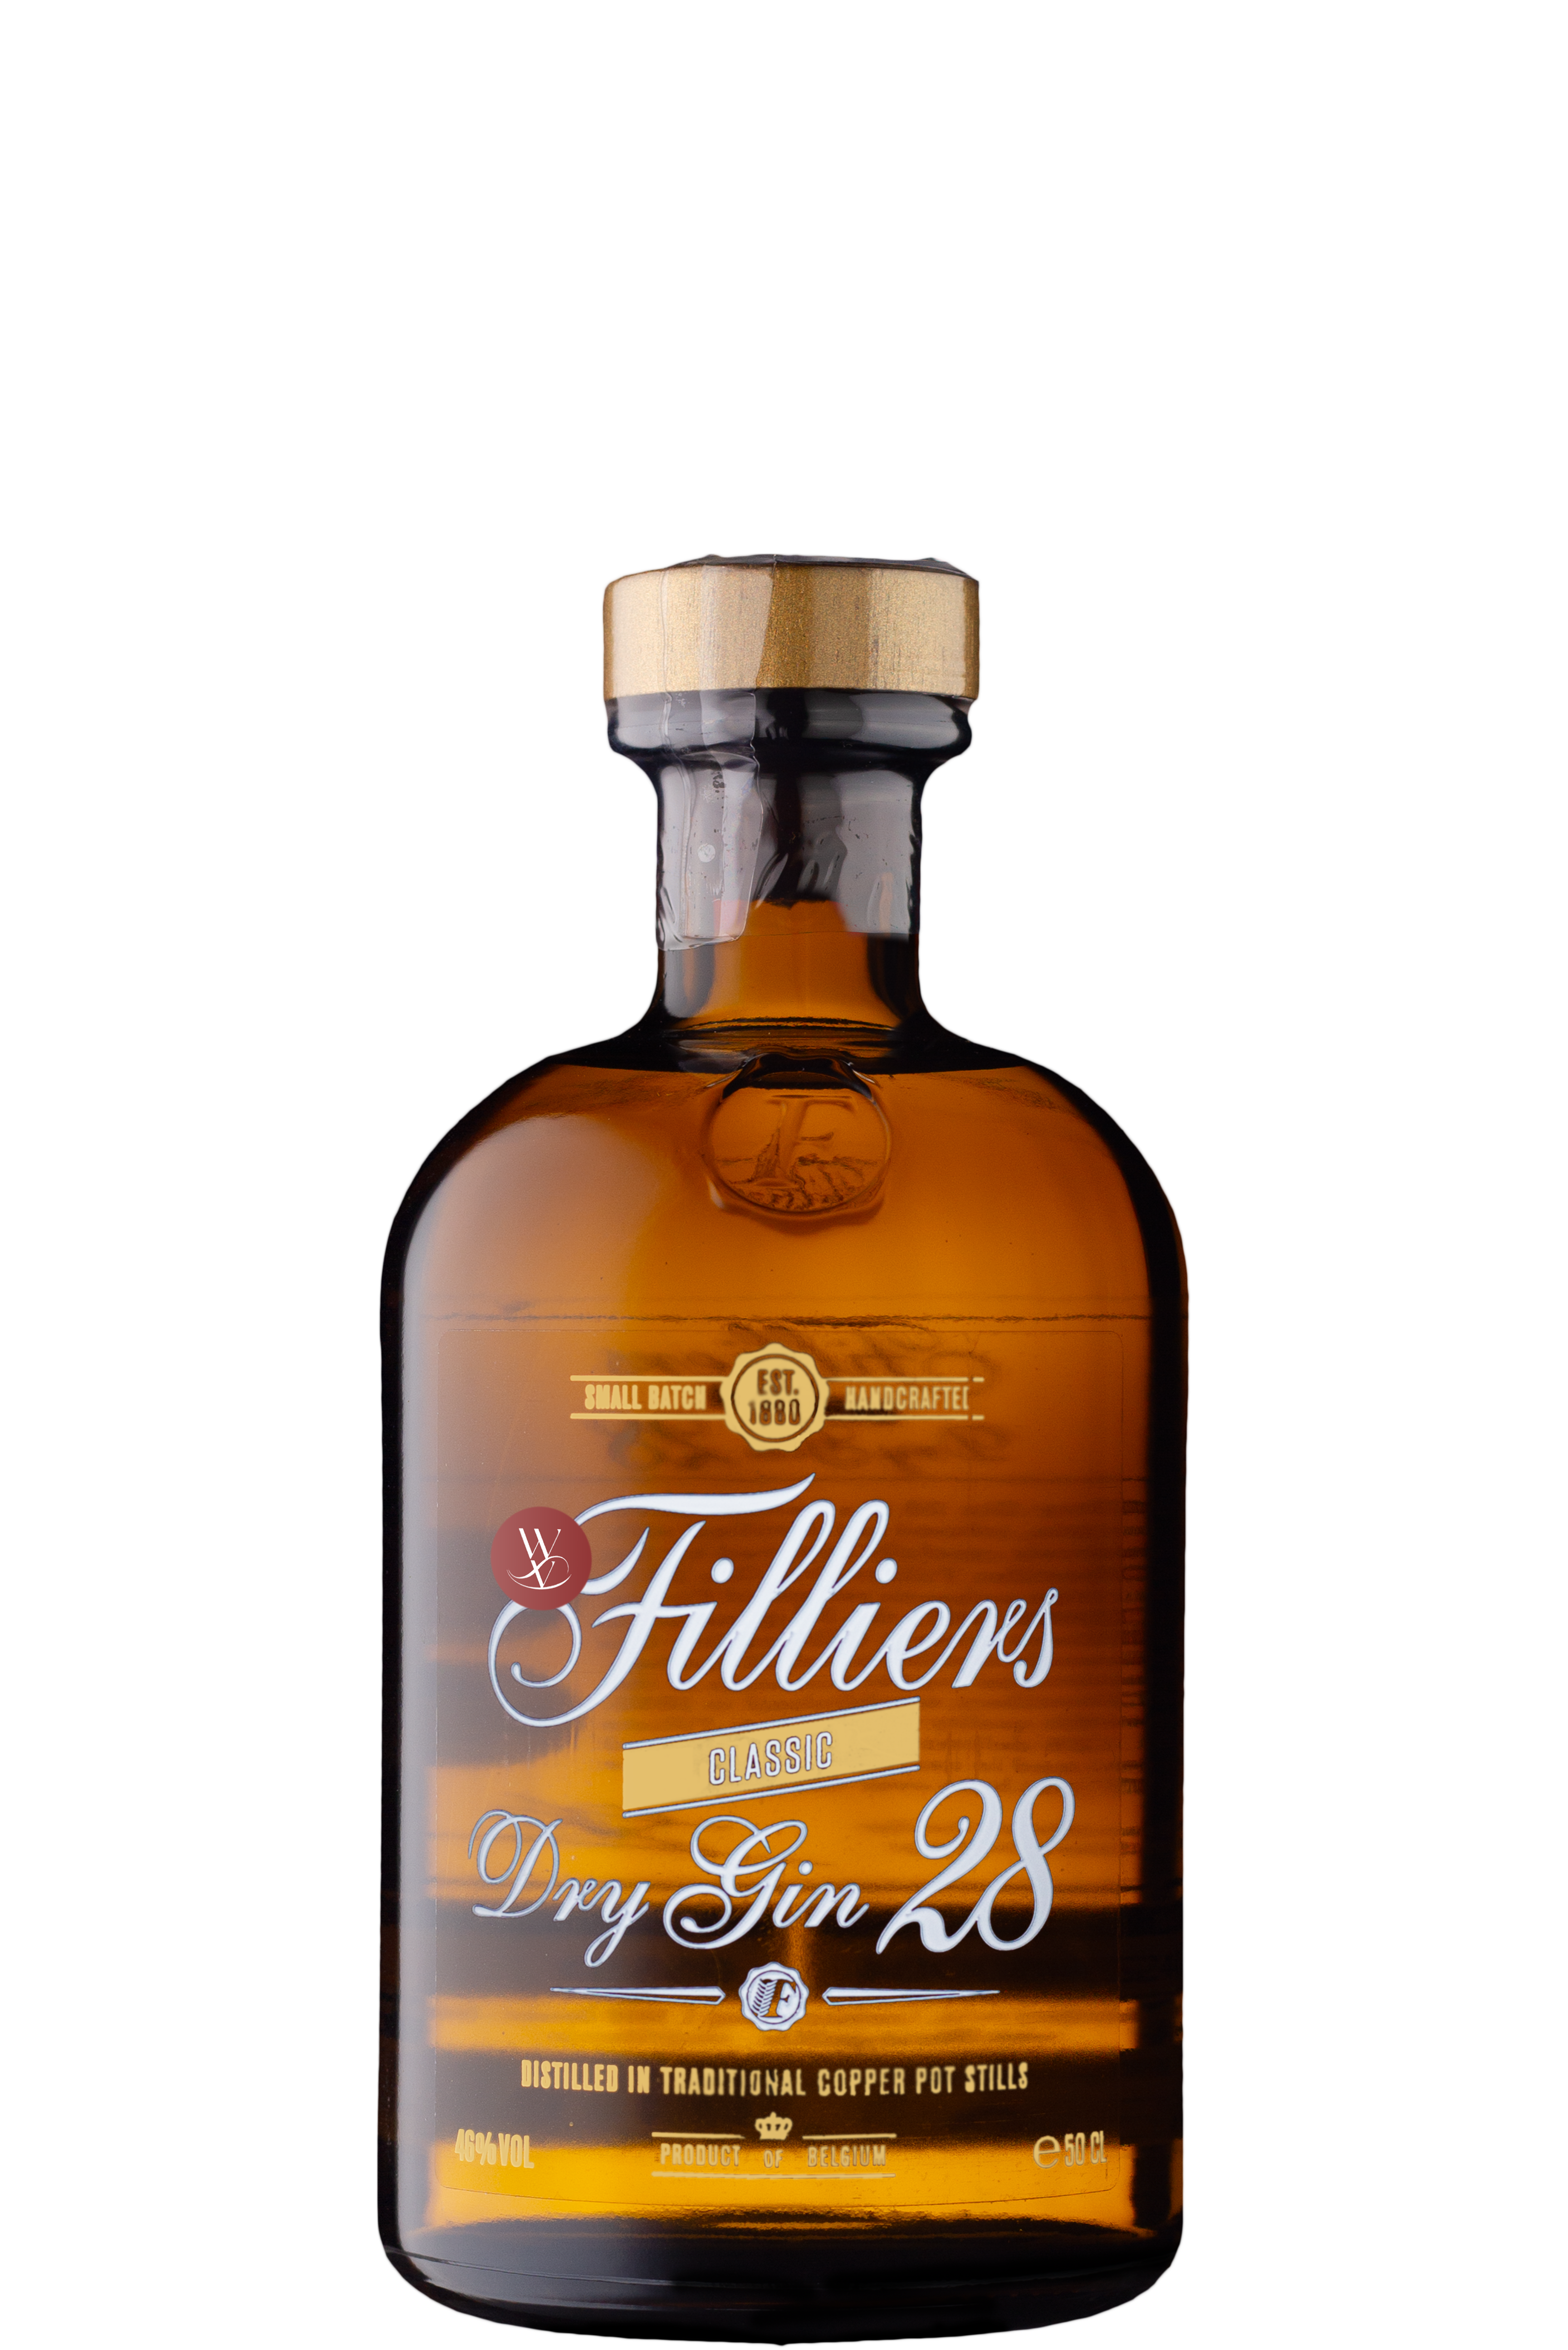 WineVins Filliers 28 Dry Gin 50cl